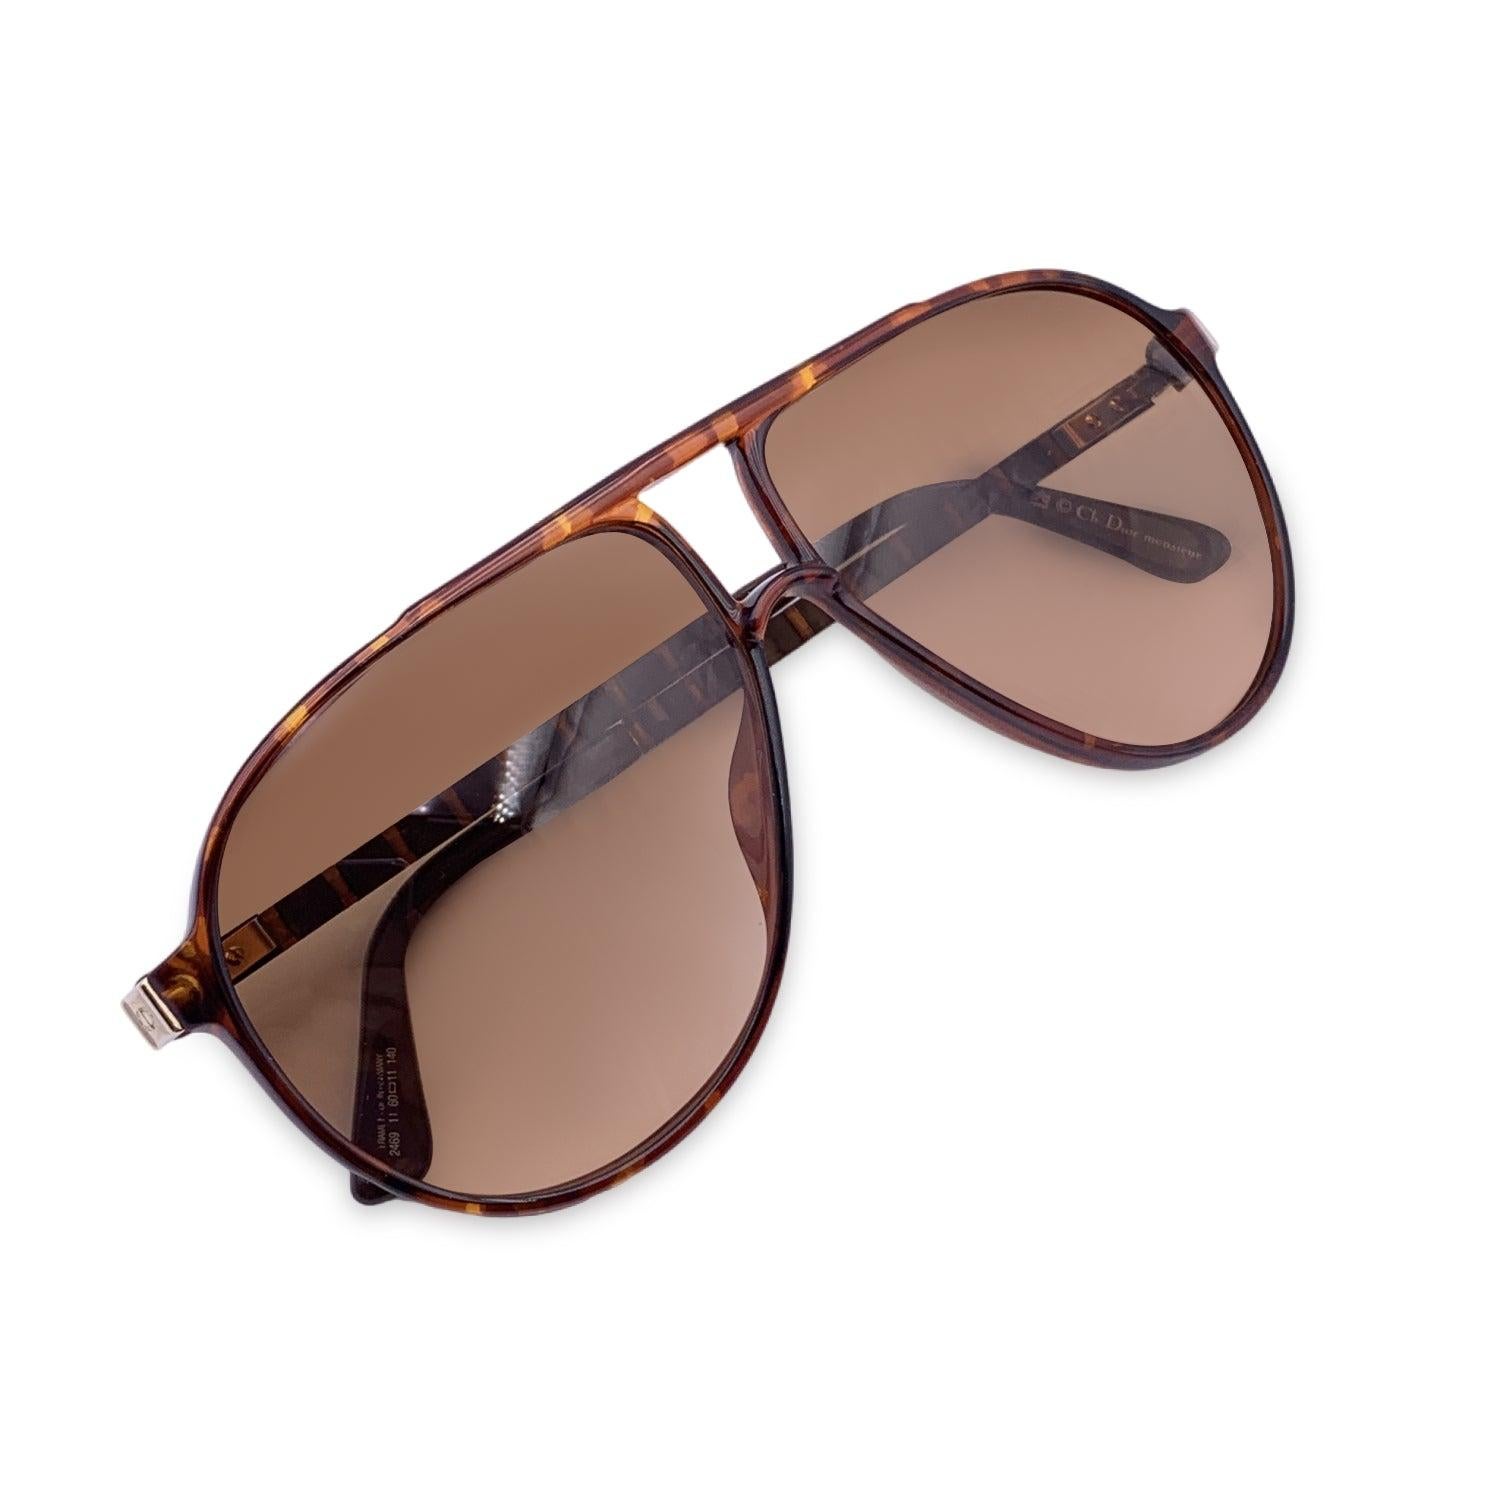 Vintage Christian Dior Monsieur Unisex Sunglasses from 1988. Mod. 2469 11 Size 60/11 140mm. Brown acetate Optyl frame, with gold metal finish. 100% Total UVA/UVB protection brown gradient lenses. CD logos on the side of the temples. Details